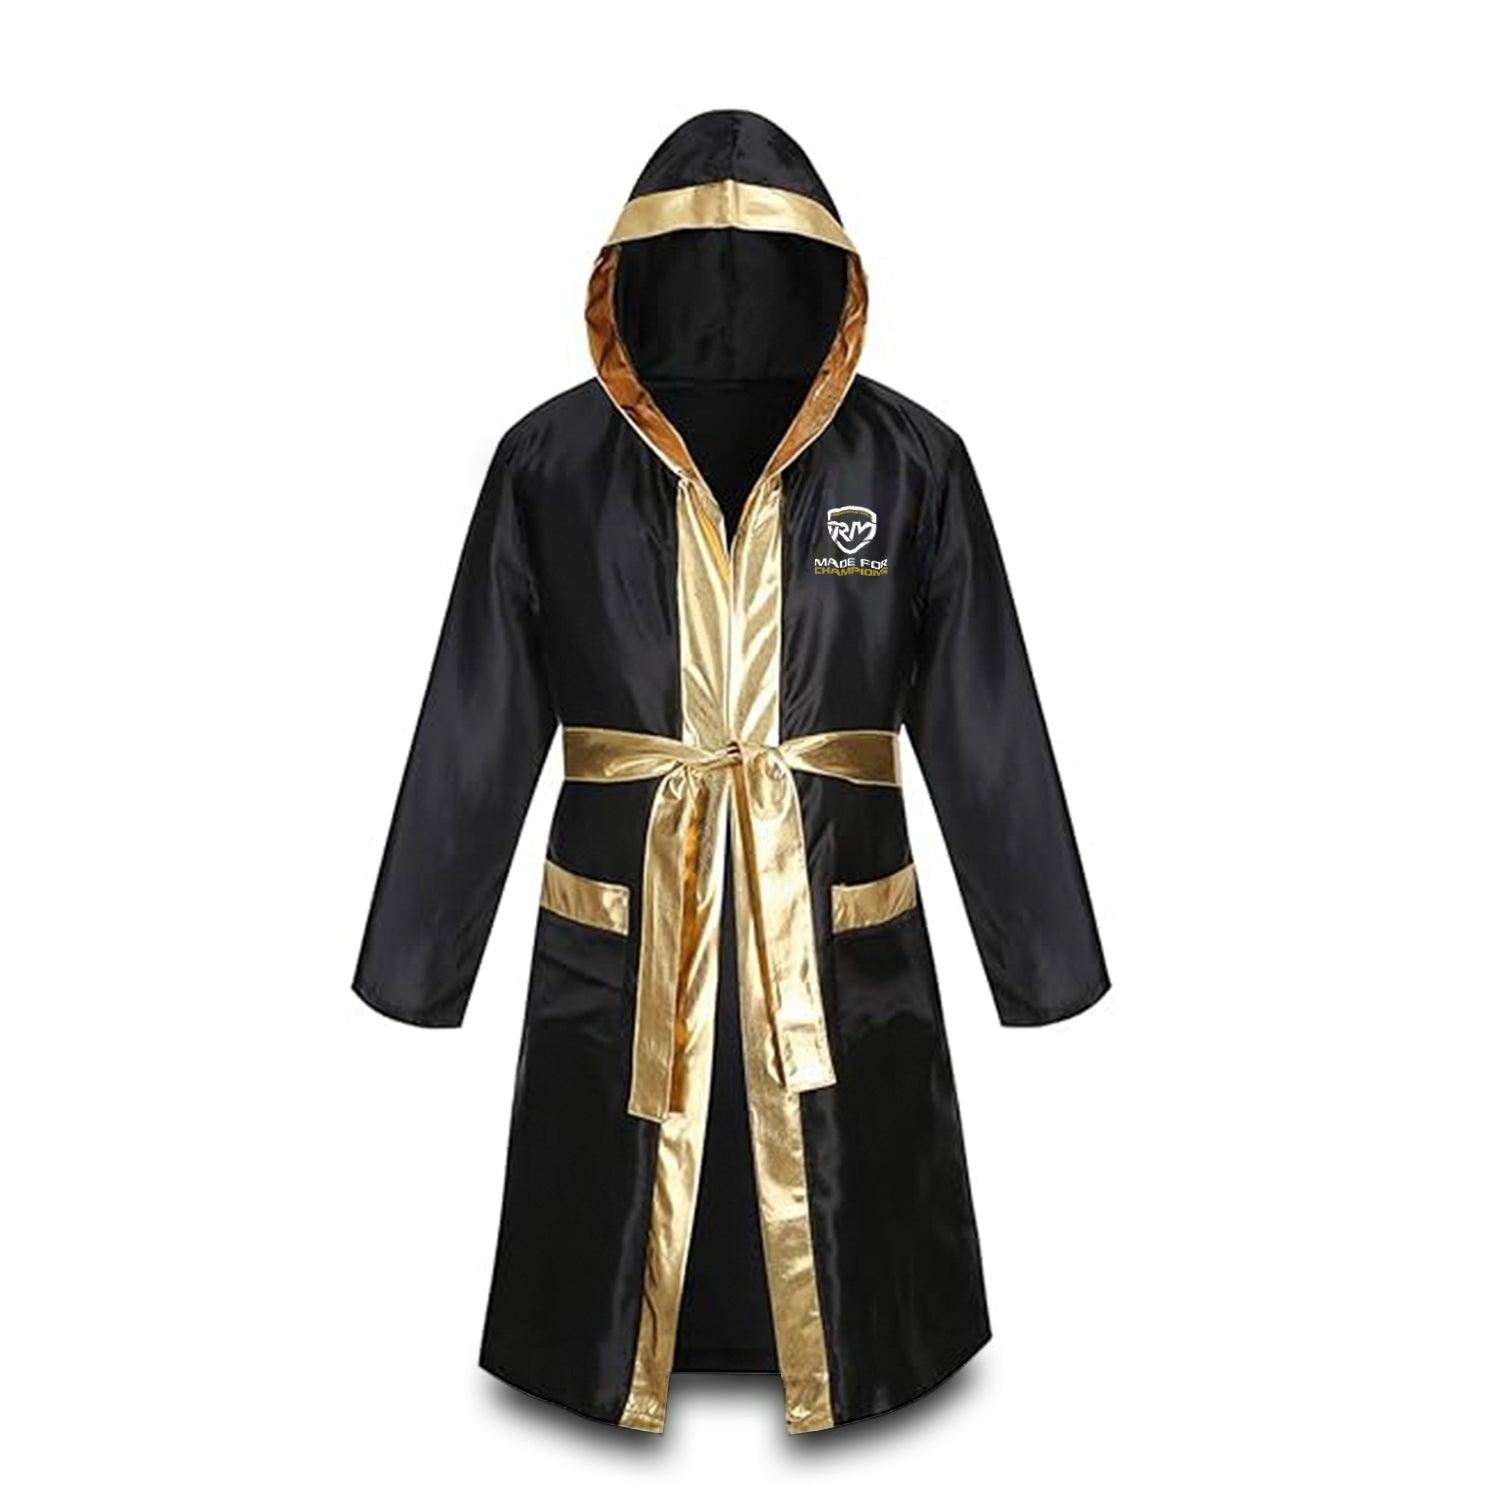 RingMaster Sports Champion Series Kids Boxing Fight Robe Black & Gold Gown Image 1